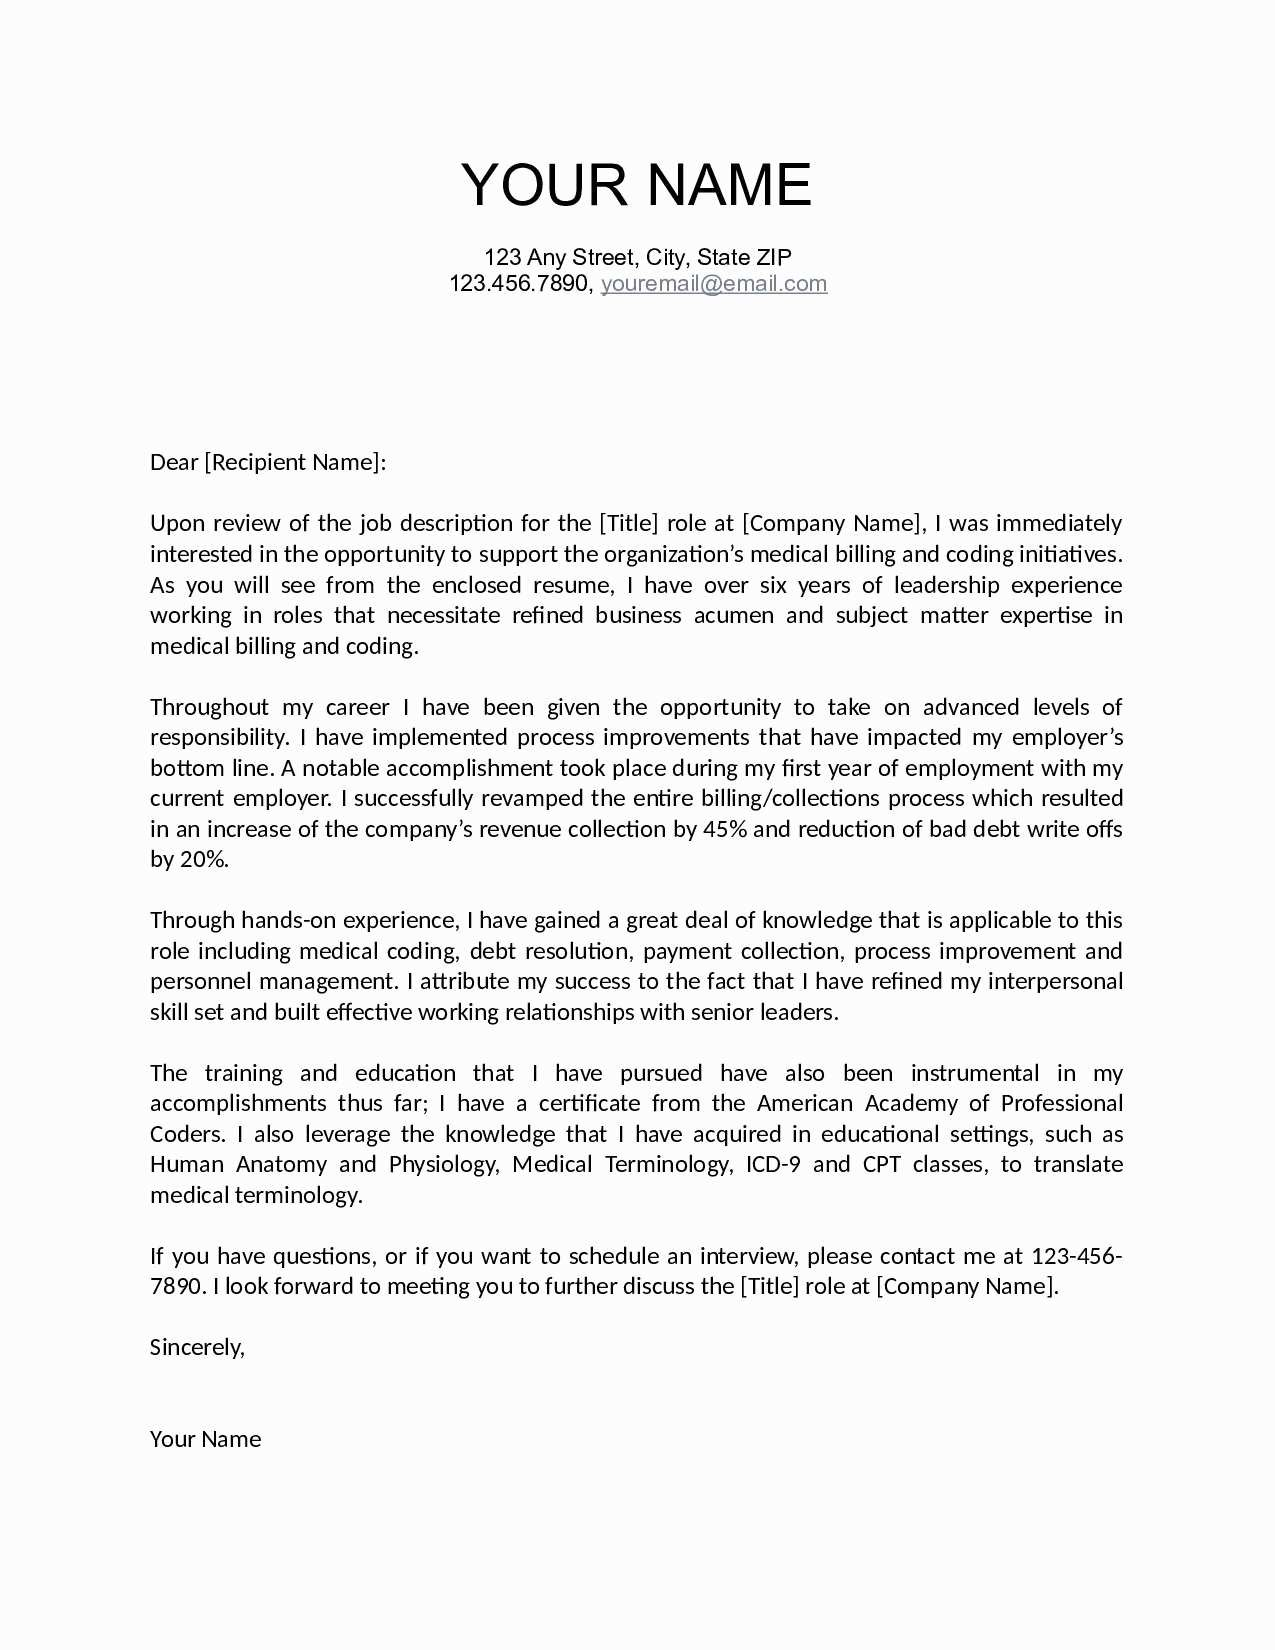 I Want to Buy Your House Letter Template - Job Fer Letter Template Us Copy Od Consultant Cover Letter Fungram